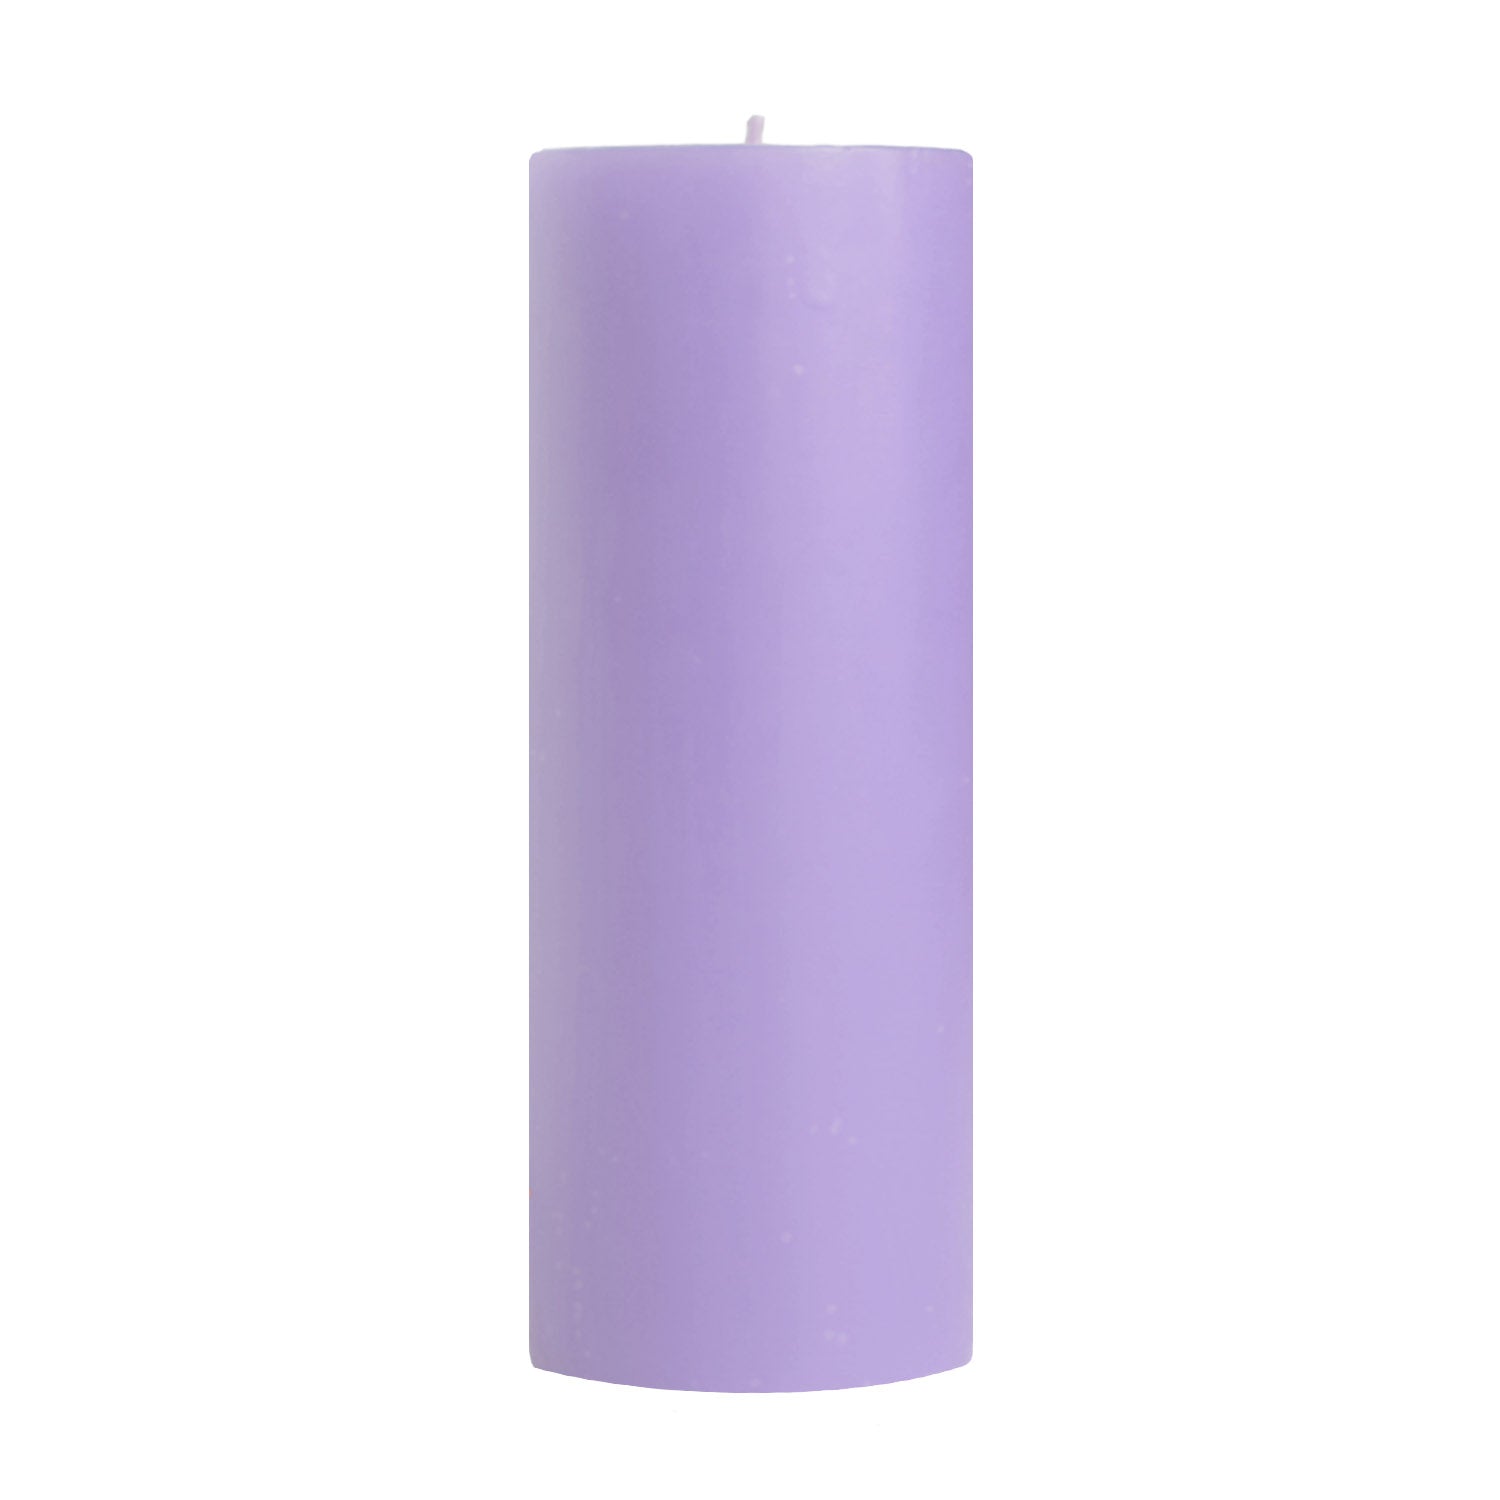 3x9" Lavender Scented Pillar Candles